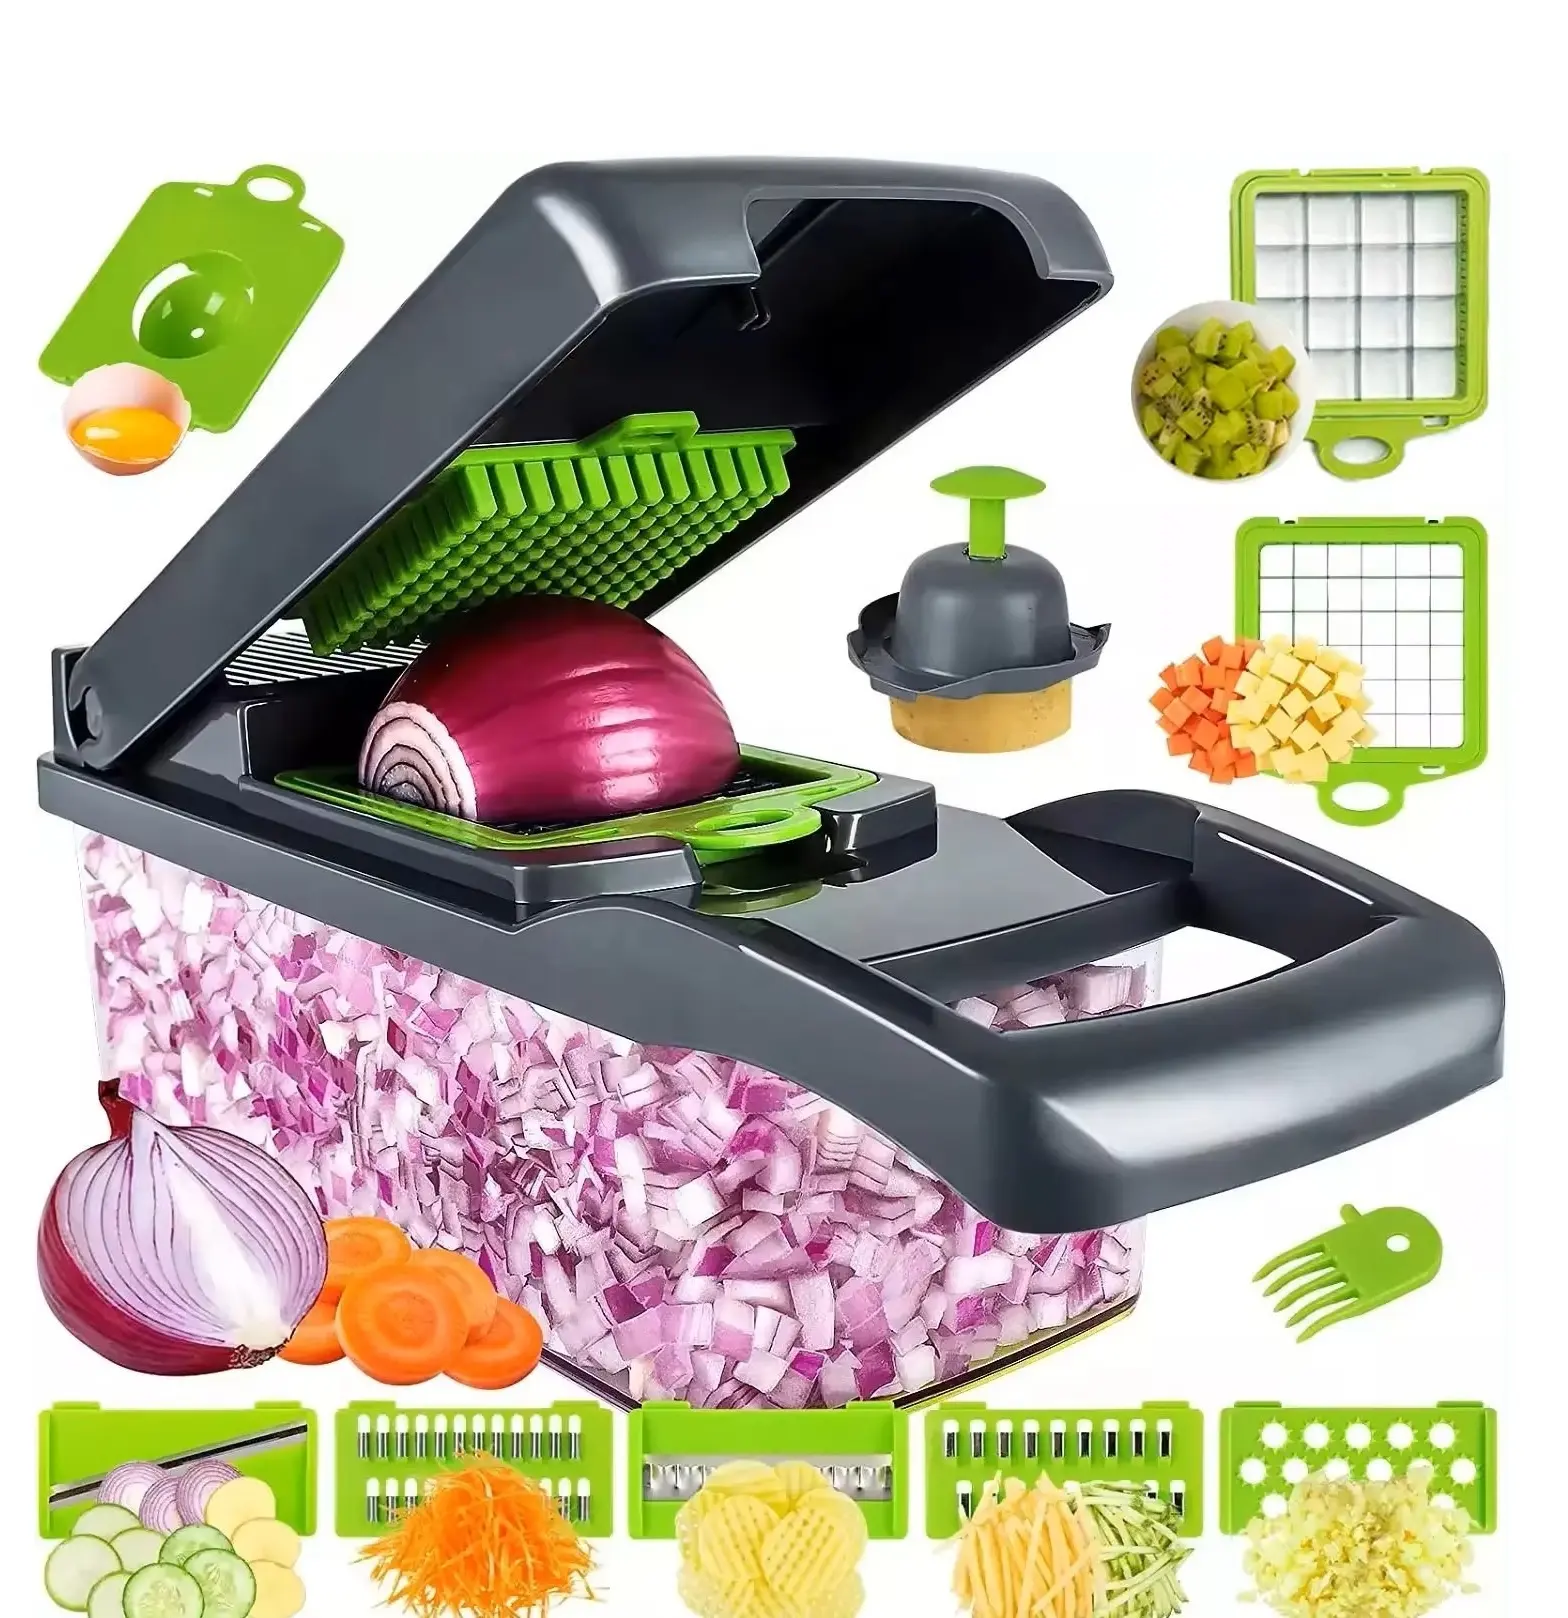 Hot Selling Good quality stainless steel multifunctional manual mandolin 13 in 1 vegetable chopper